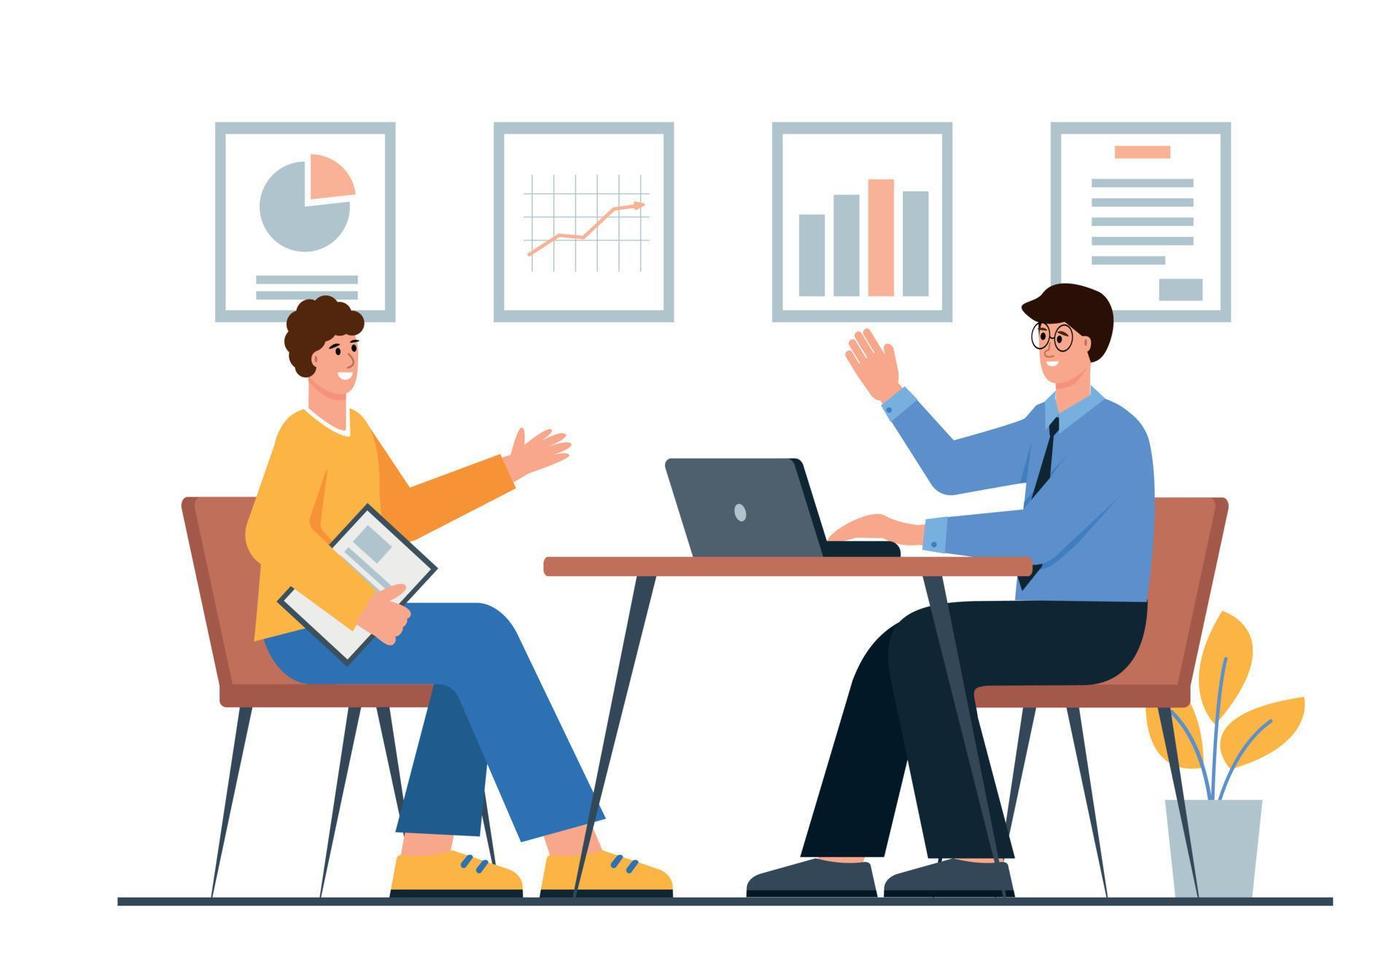 Business negotiations or Job interview. Two businessmen partners made deal at meeting in office. Partnership, agreement, hiring or recruiting concept. Flat vector illustration.